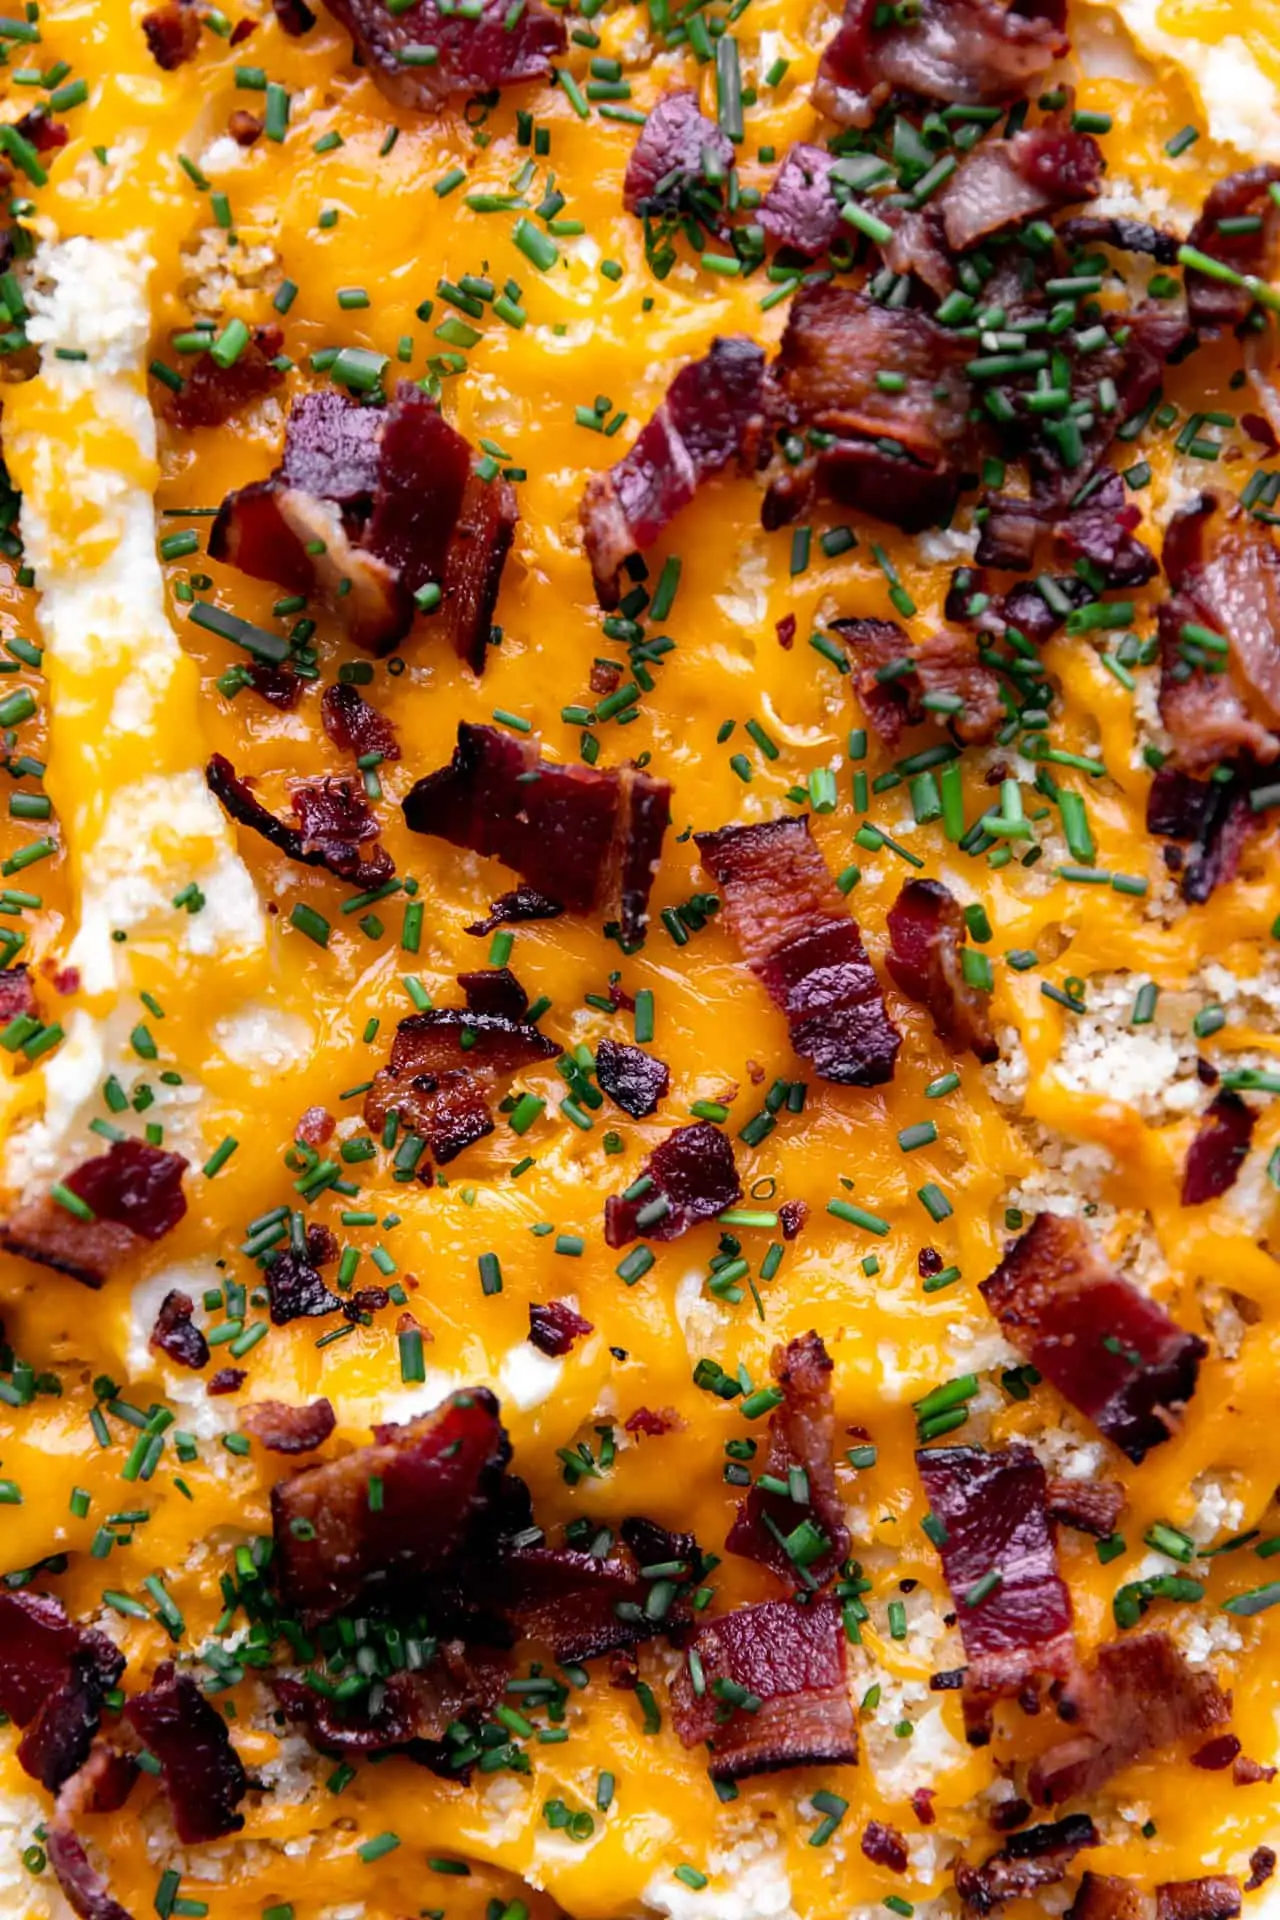 Toppings added to the mashed potato casserole after baking, showing melted cheese and crispy bacon with bits of fresh chives.